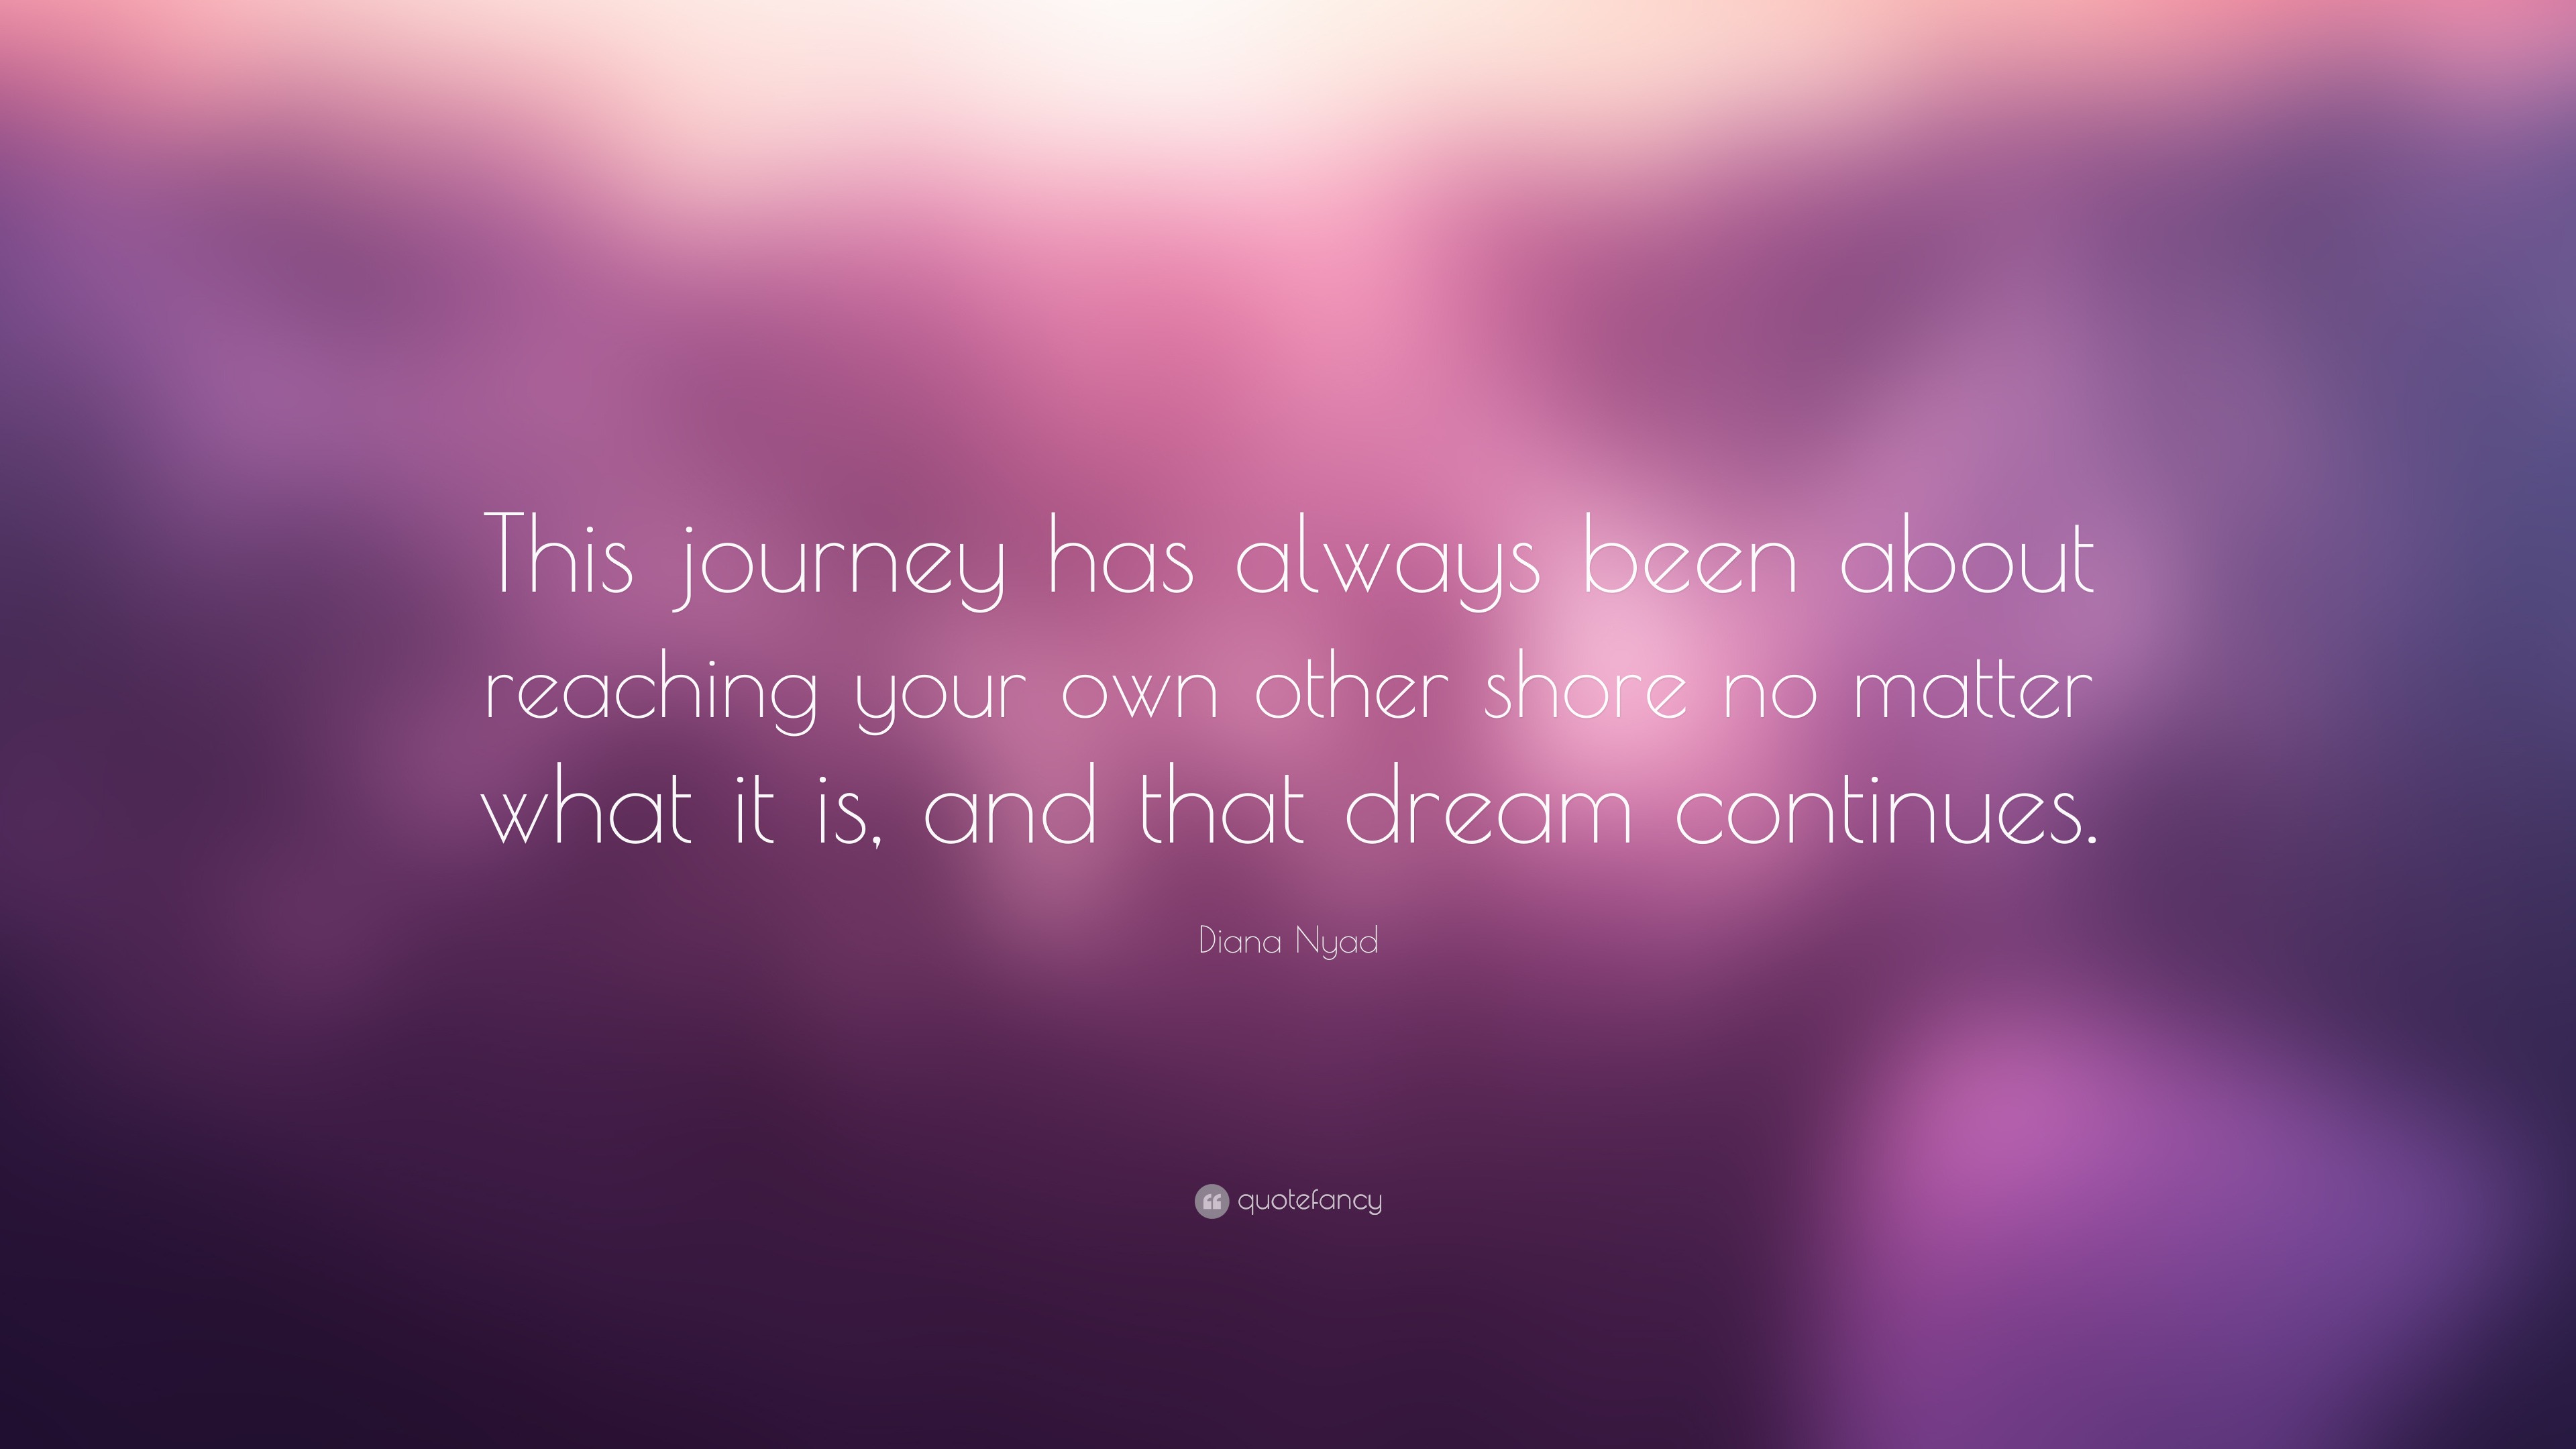 Diana Nyad Quote: “This journey has always been about reaching your own ...